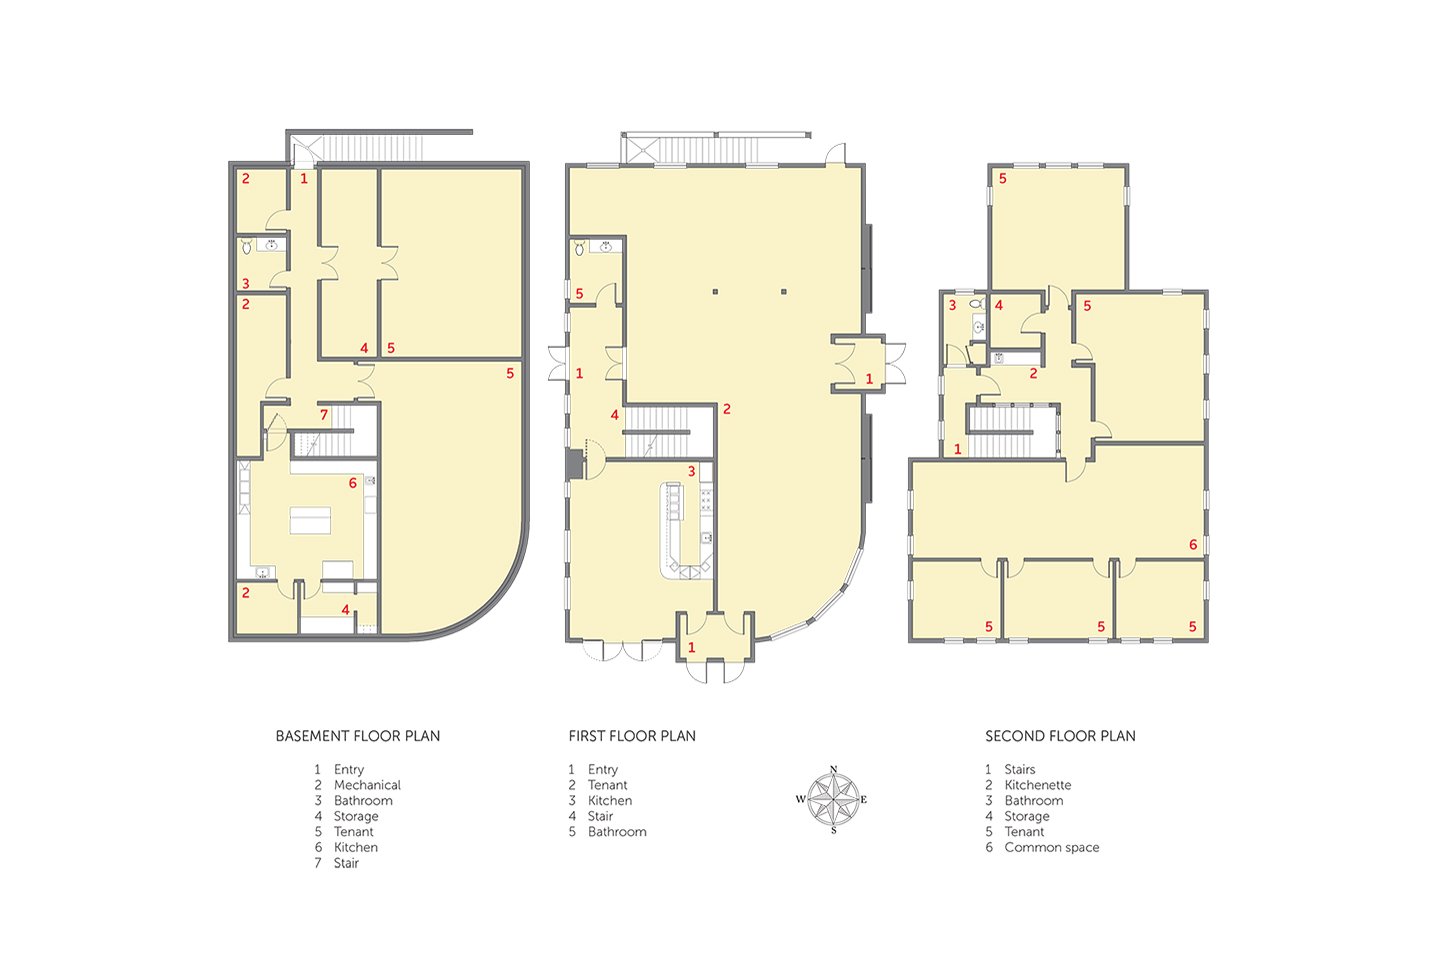 Basement, first and second floor plans in 2D